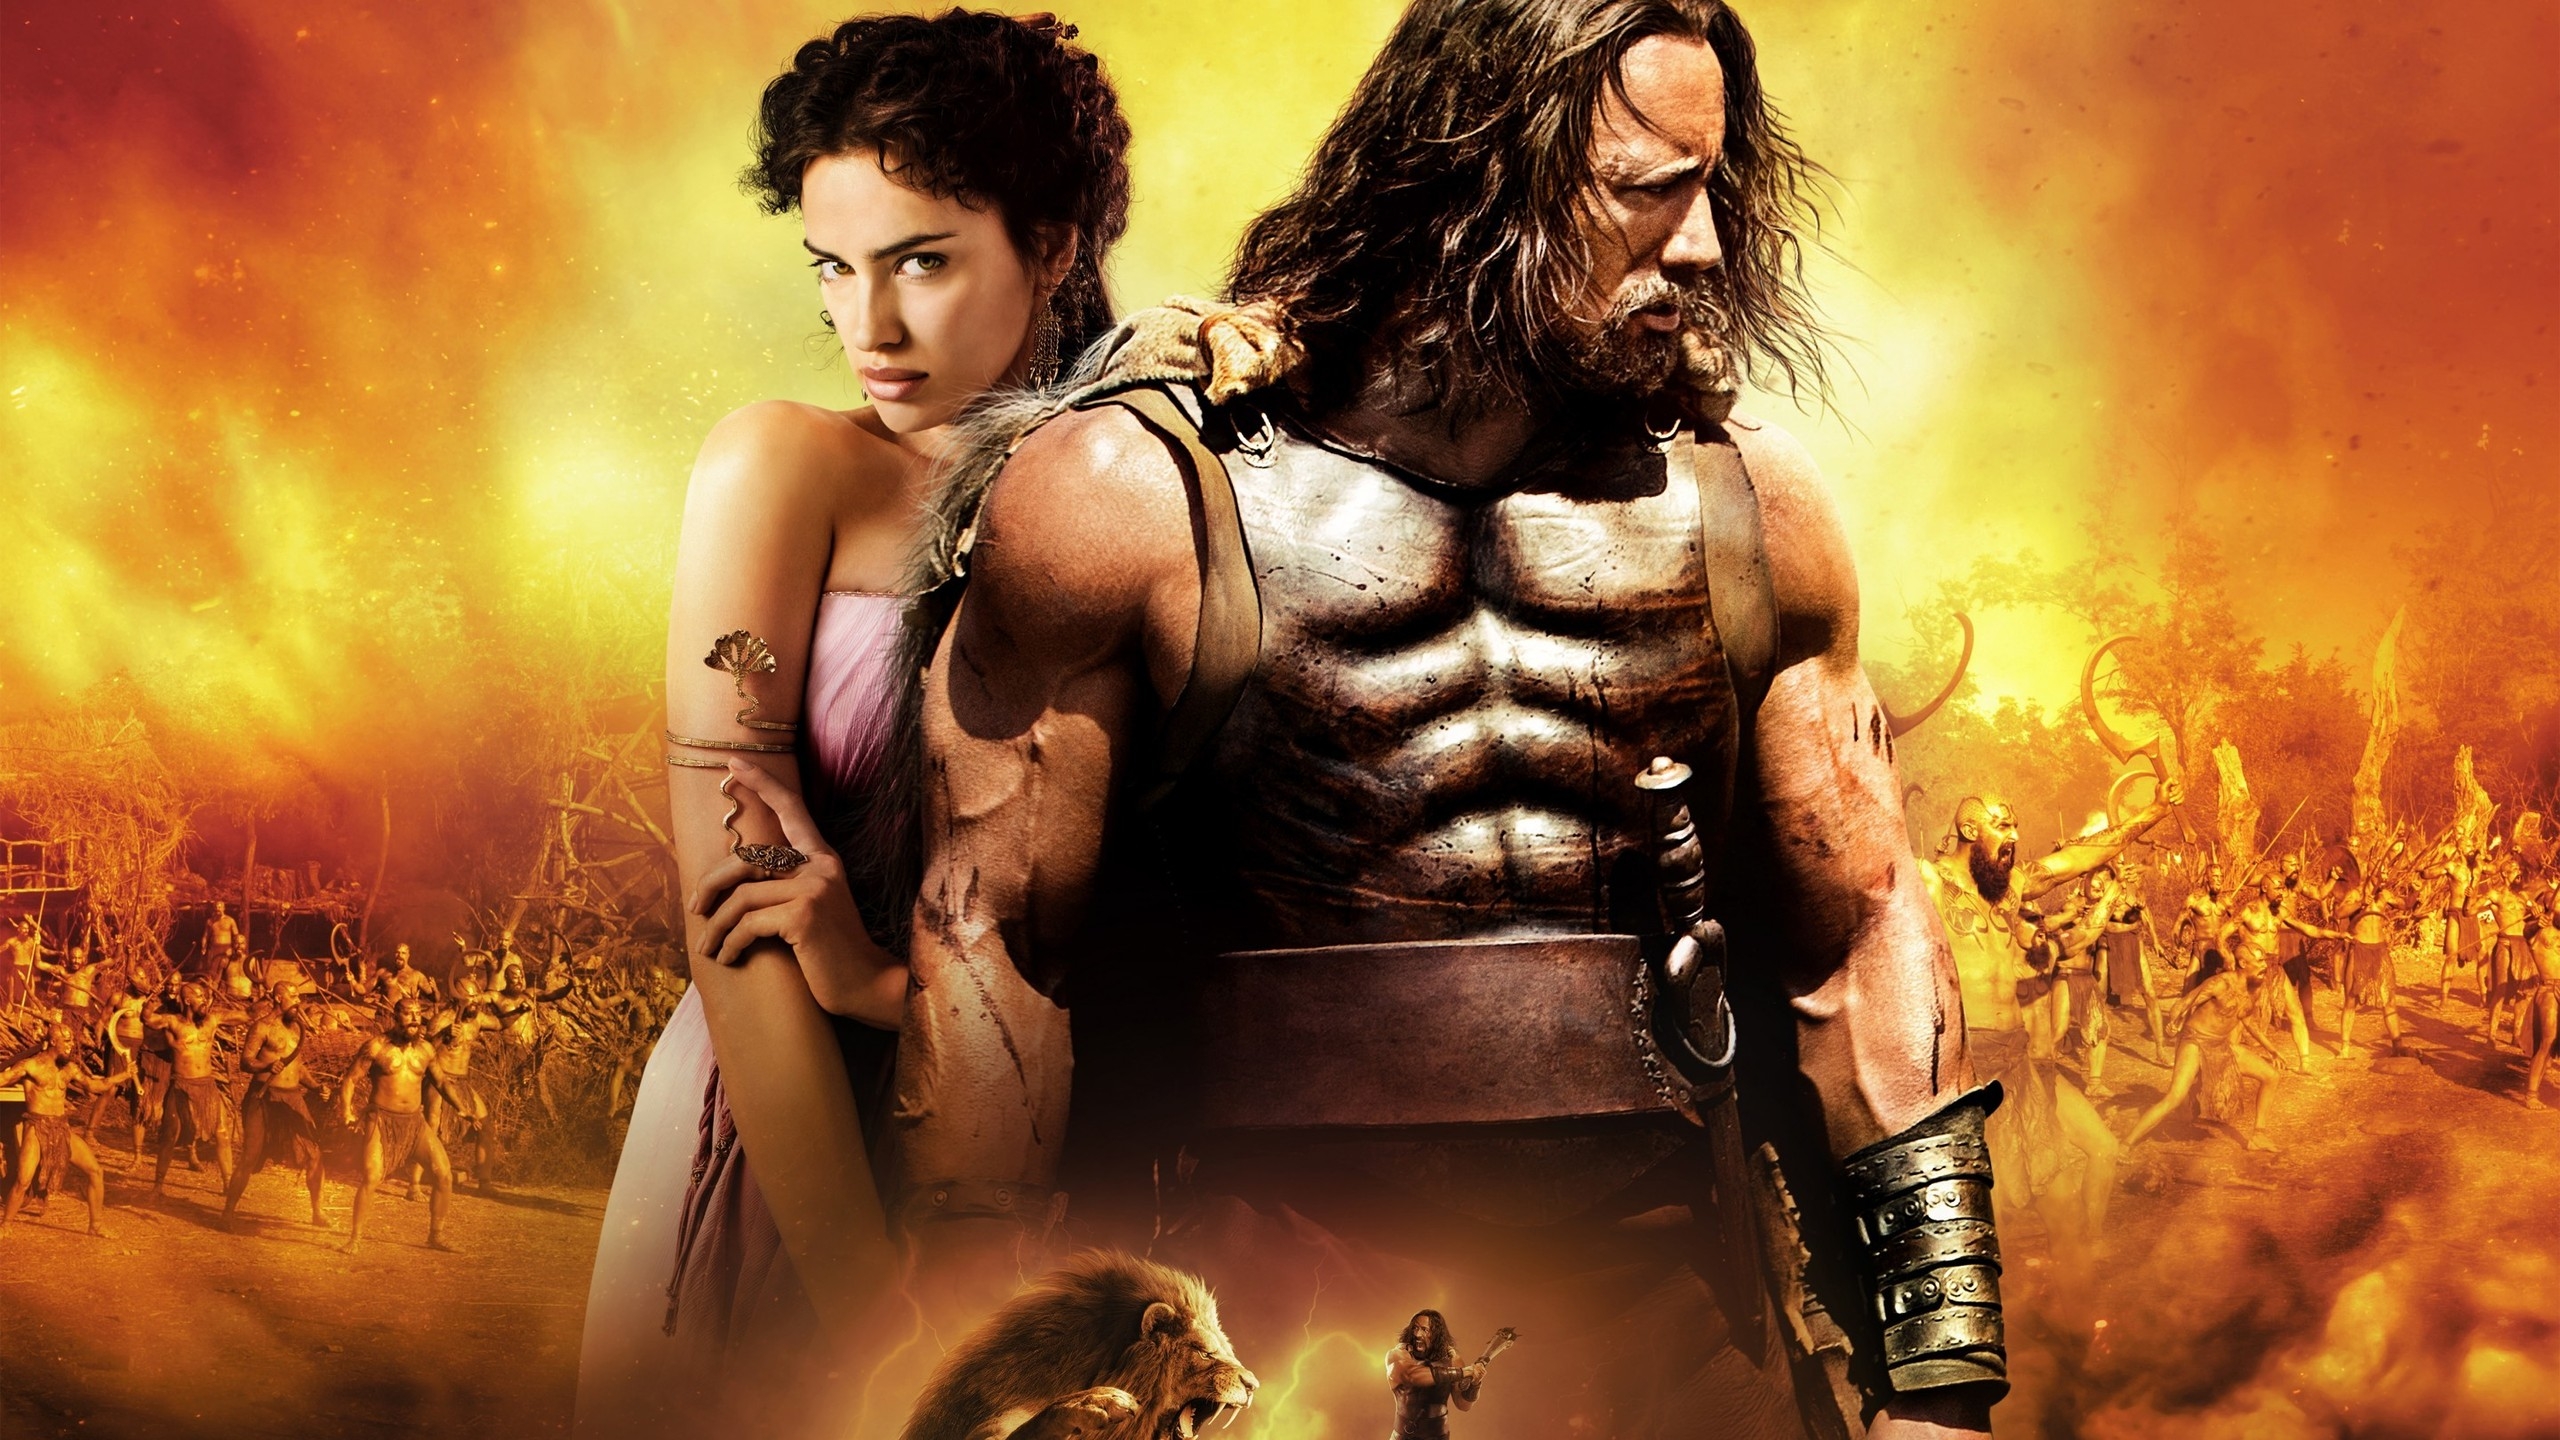 Hercules 2014 Movie Poster for 2560x1440 HDTV resolution